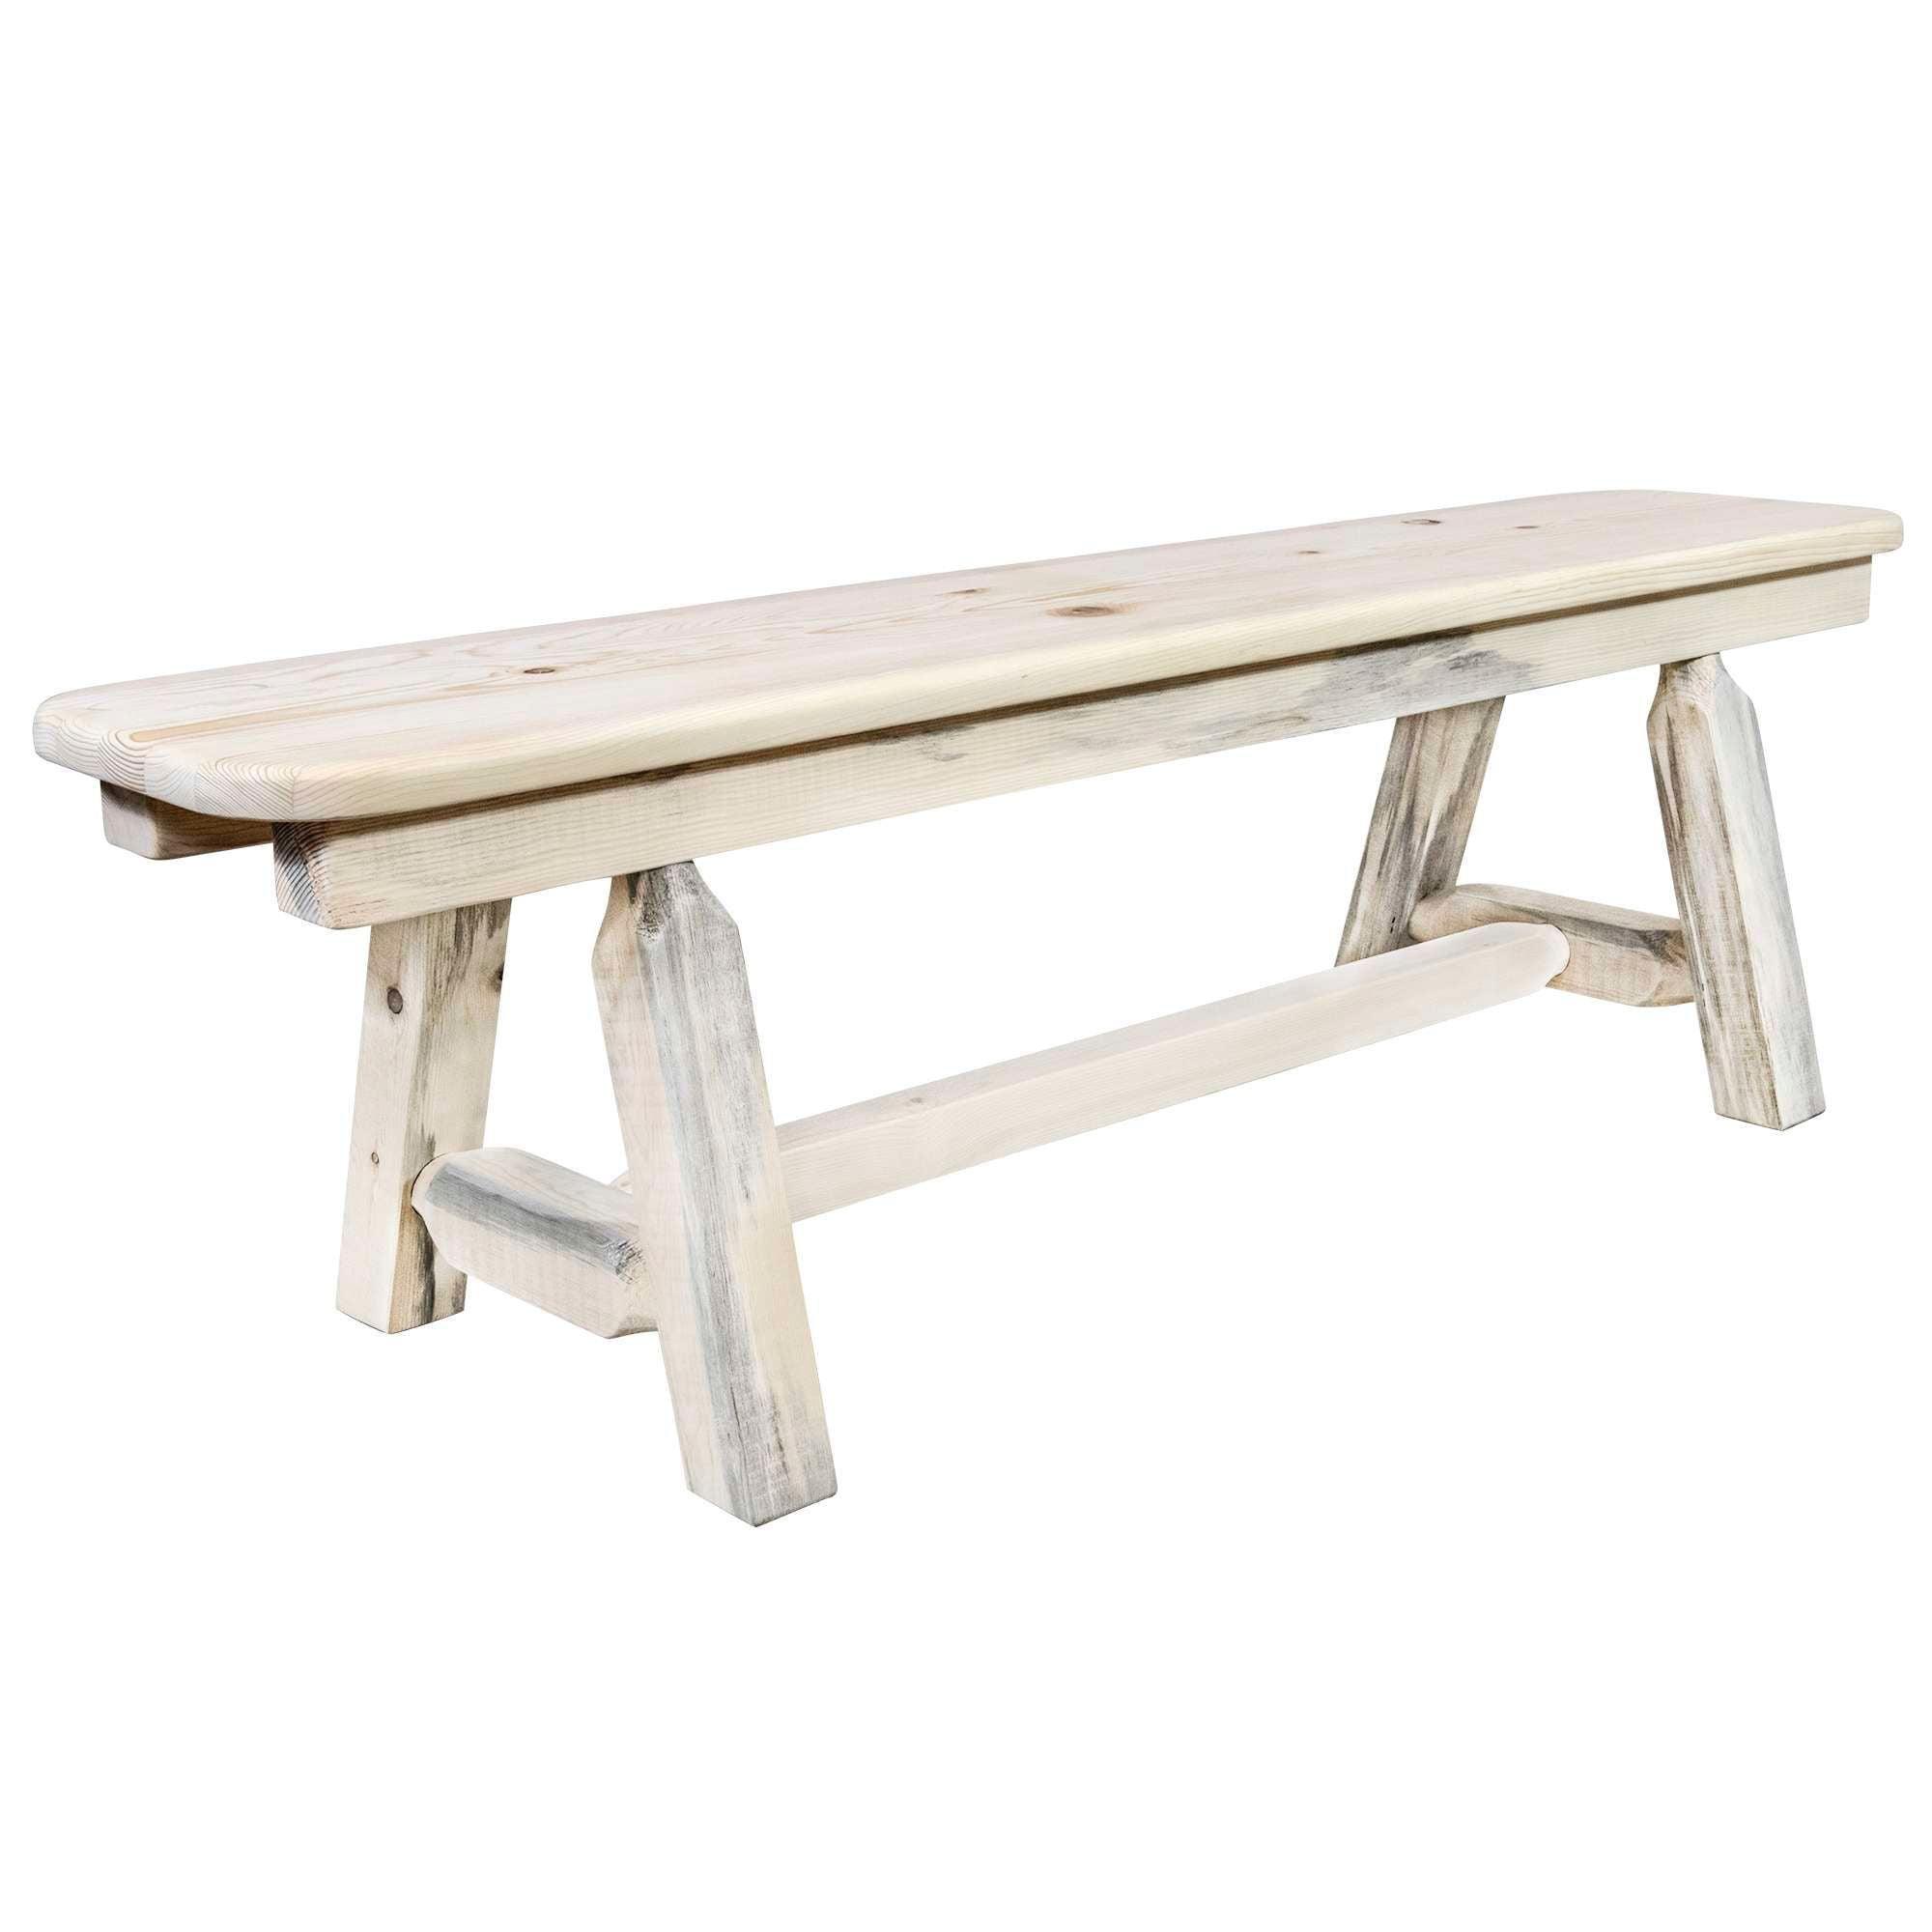 Montana Homestead 5-Foot Ready-to-Finish Solid Pine Plank Bench